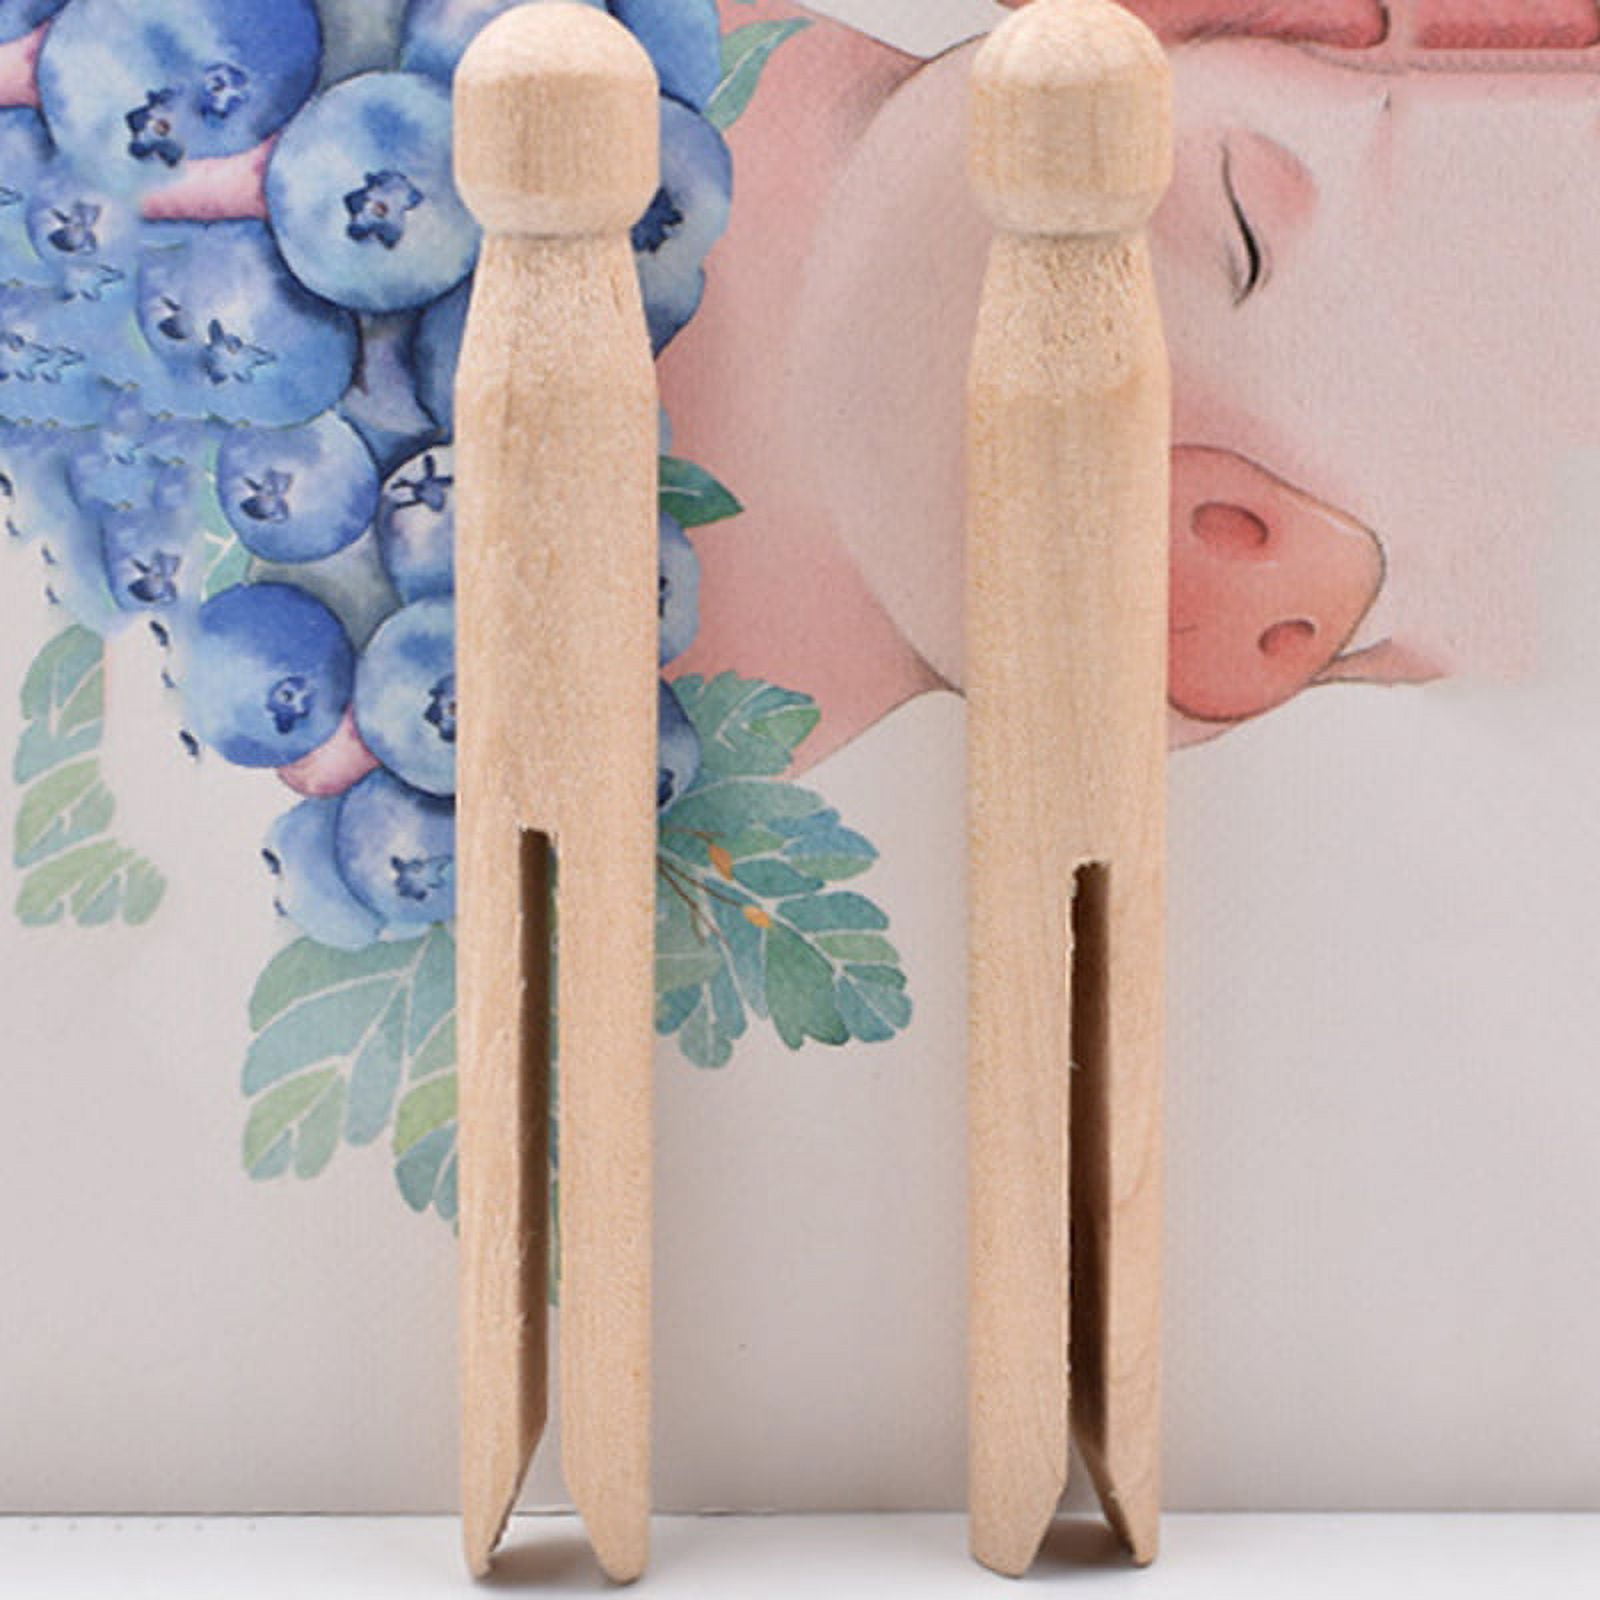 10pcs/Set Wood Crafts 10CM Long Sewing Natural Wooden Clothes Pins Peg Doll  Pins Clips Old Fashioned Pegs Doll Making Decor